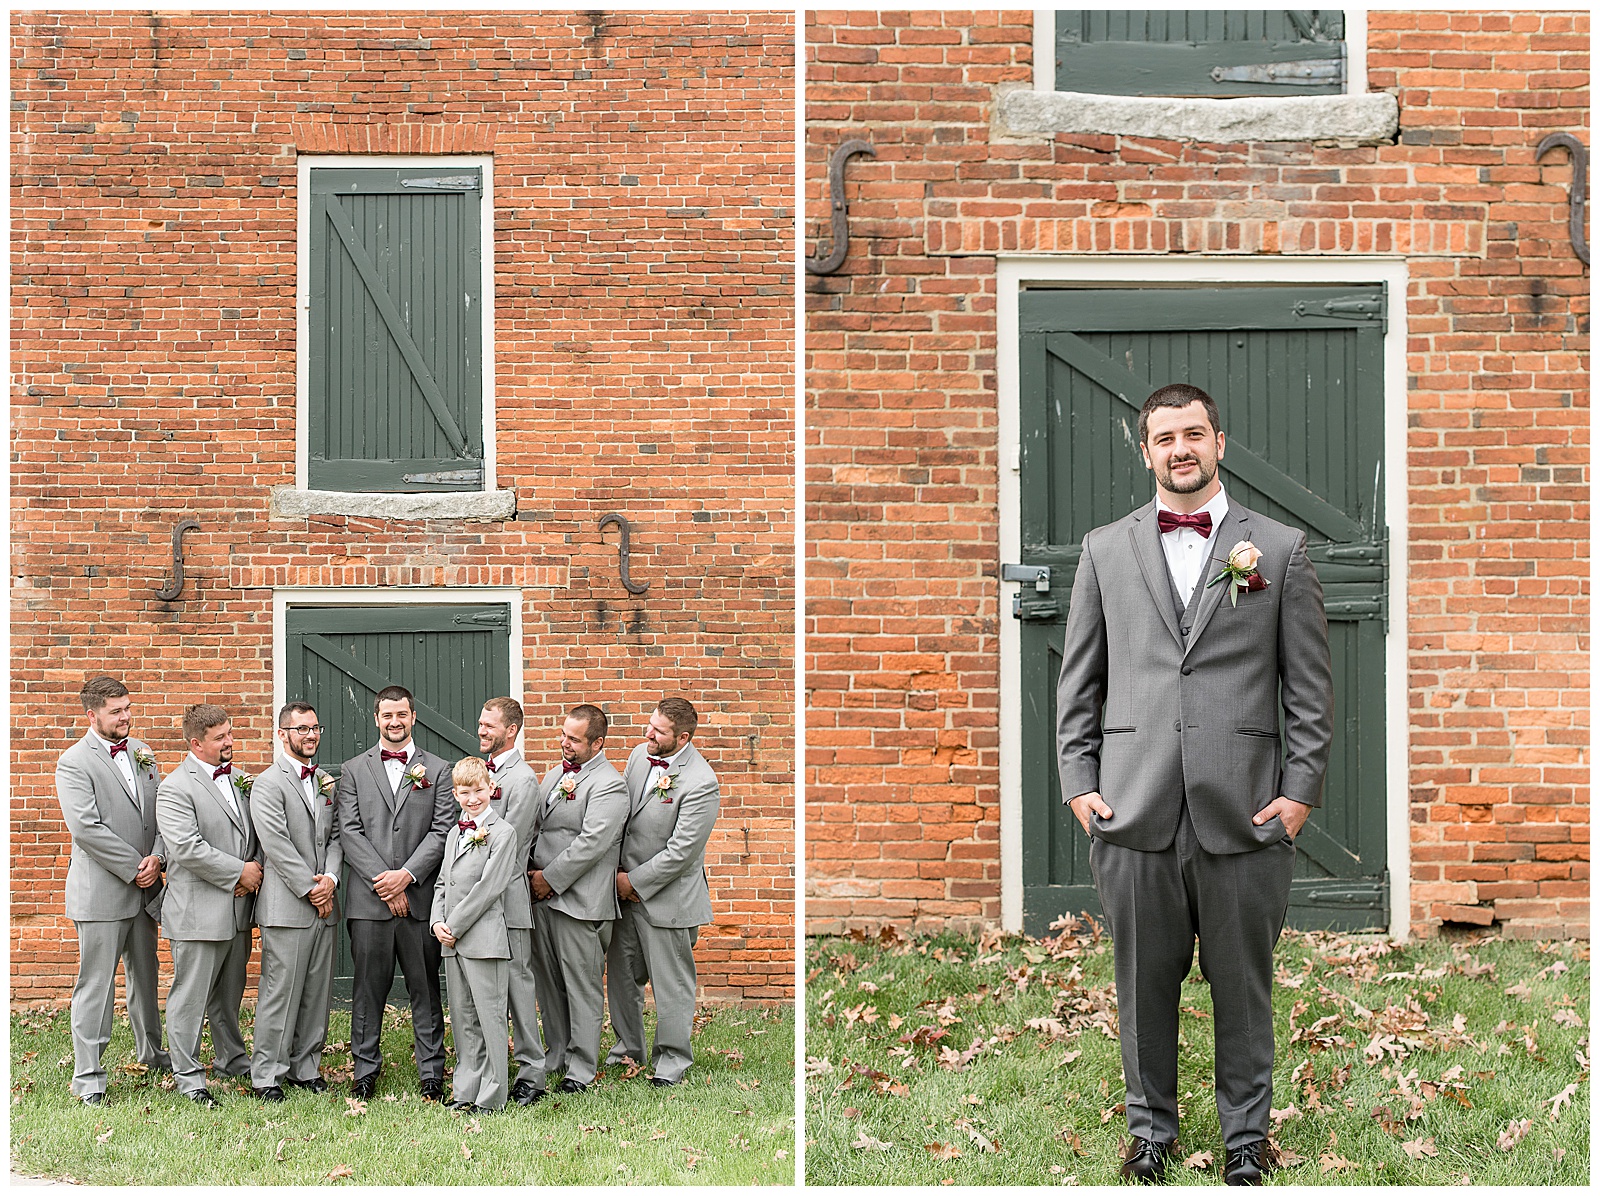 groom with groomsmen in gray suits by brick building